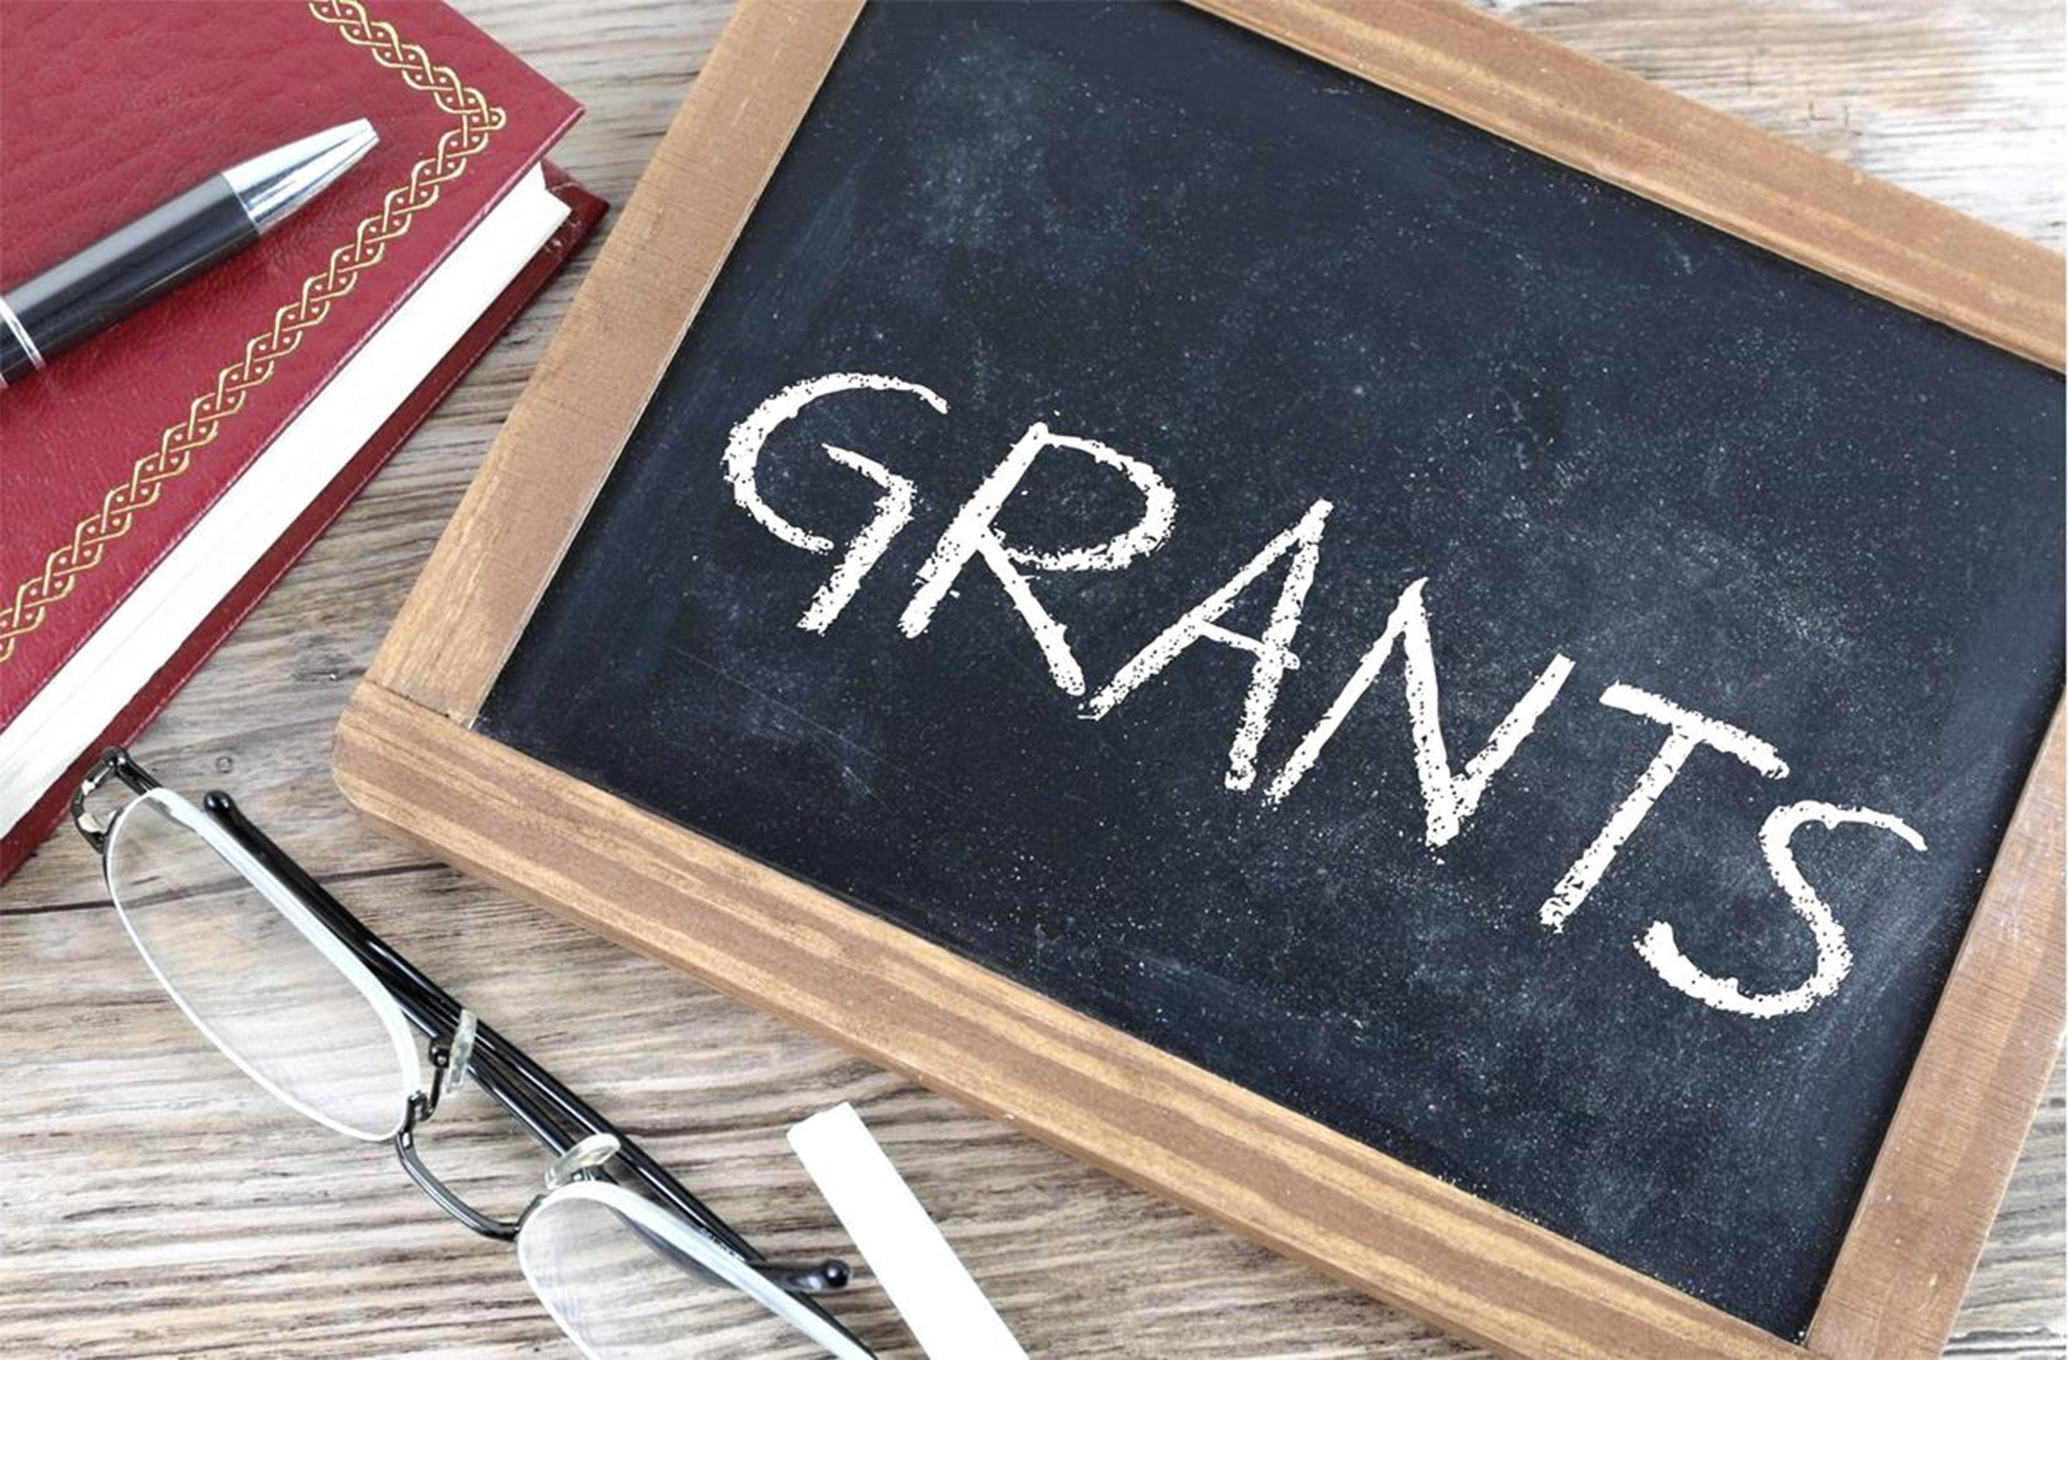 Annual Grants Applications Open